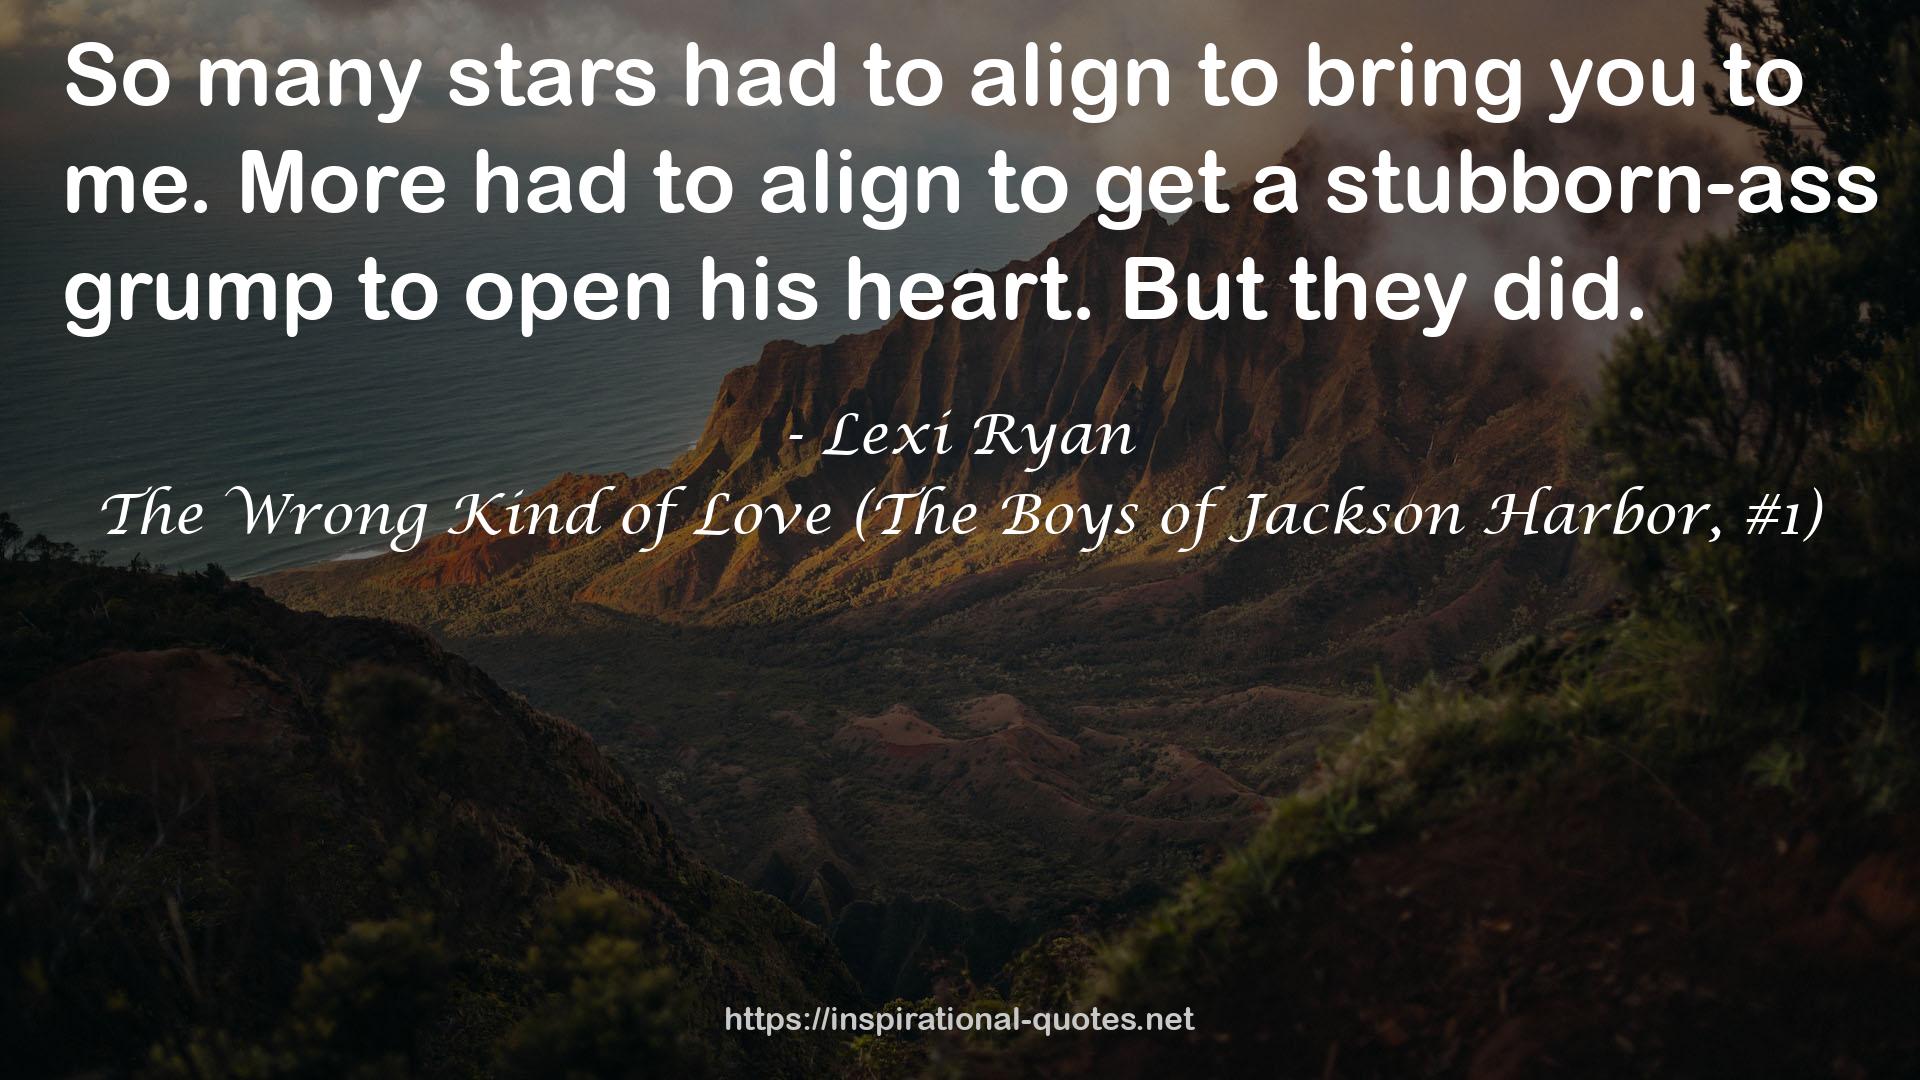 The Wrong Kind of Love (The Boys of Jackson Harbor, #1) QUOTES